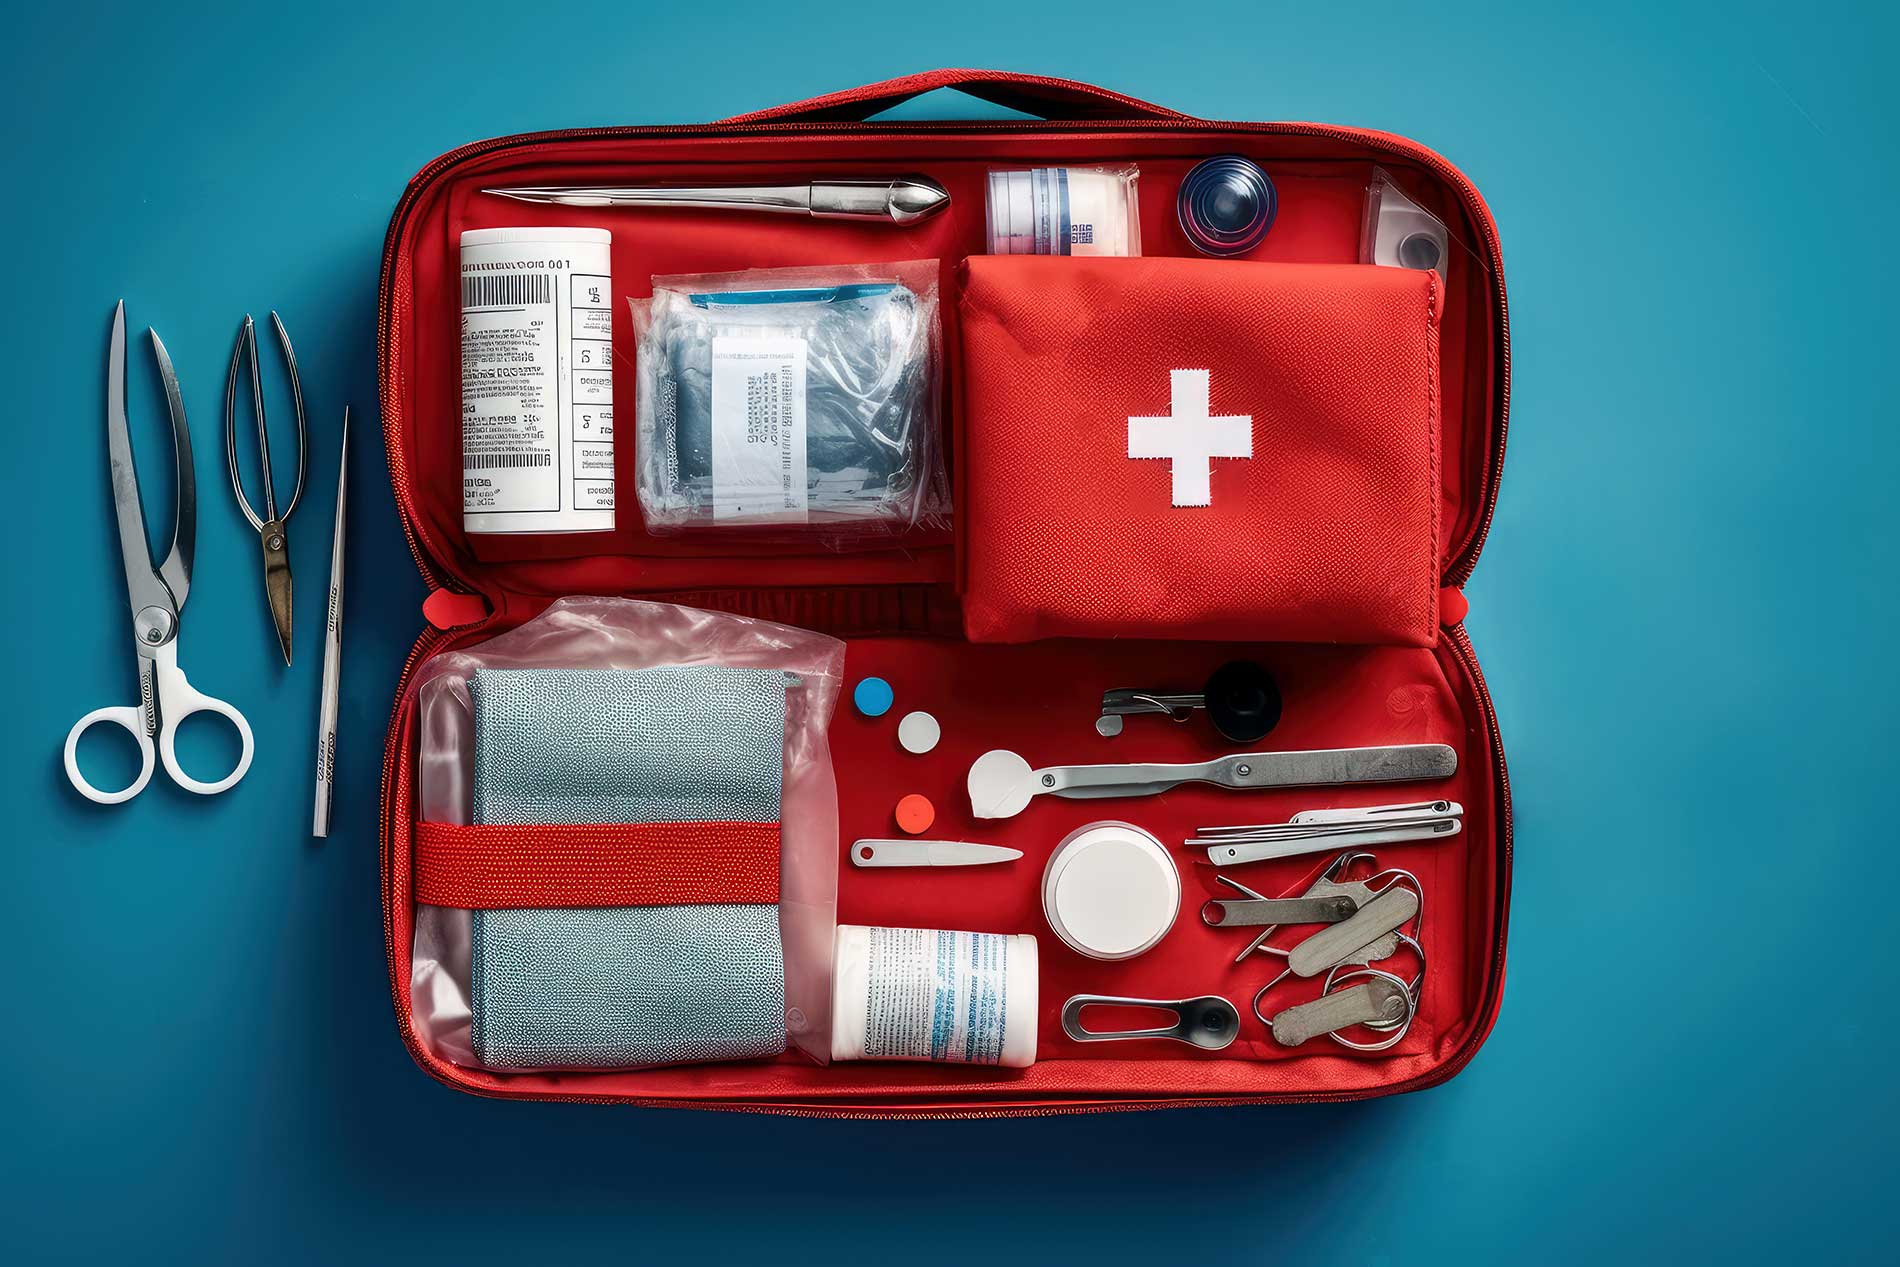 The Importance of Having a First Aid Kit in Your Home or Place of Business